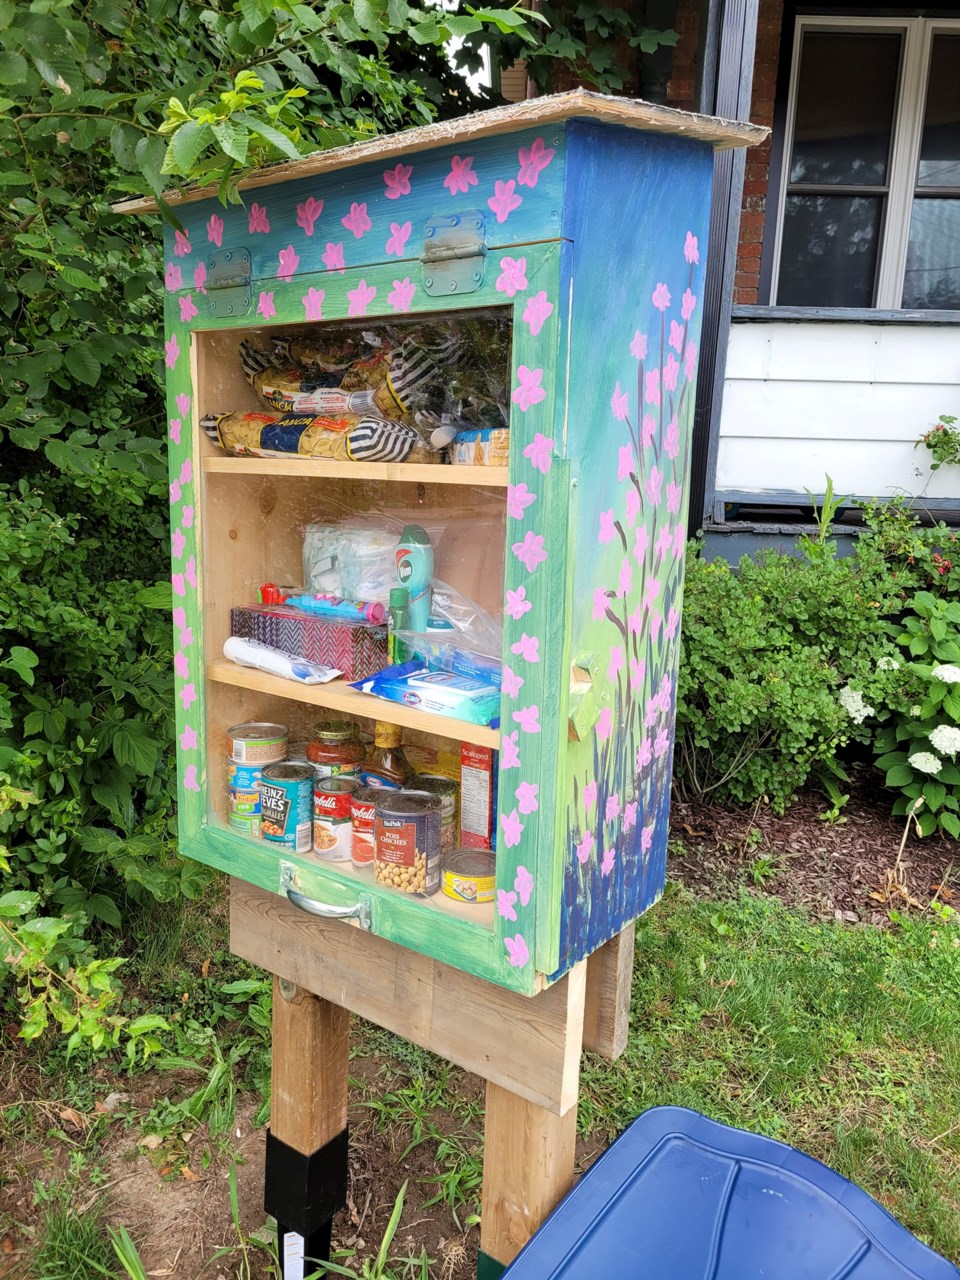 2022 2909 Little Free Pantry Project BL 1